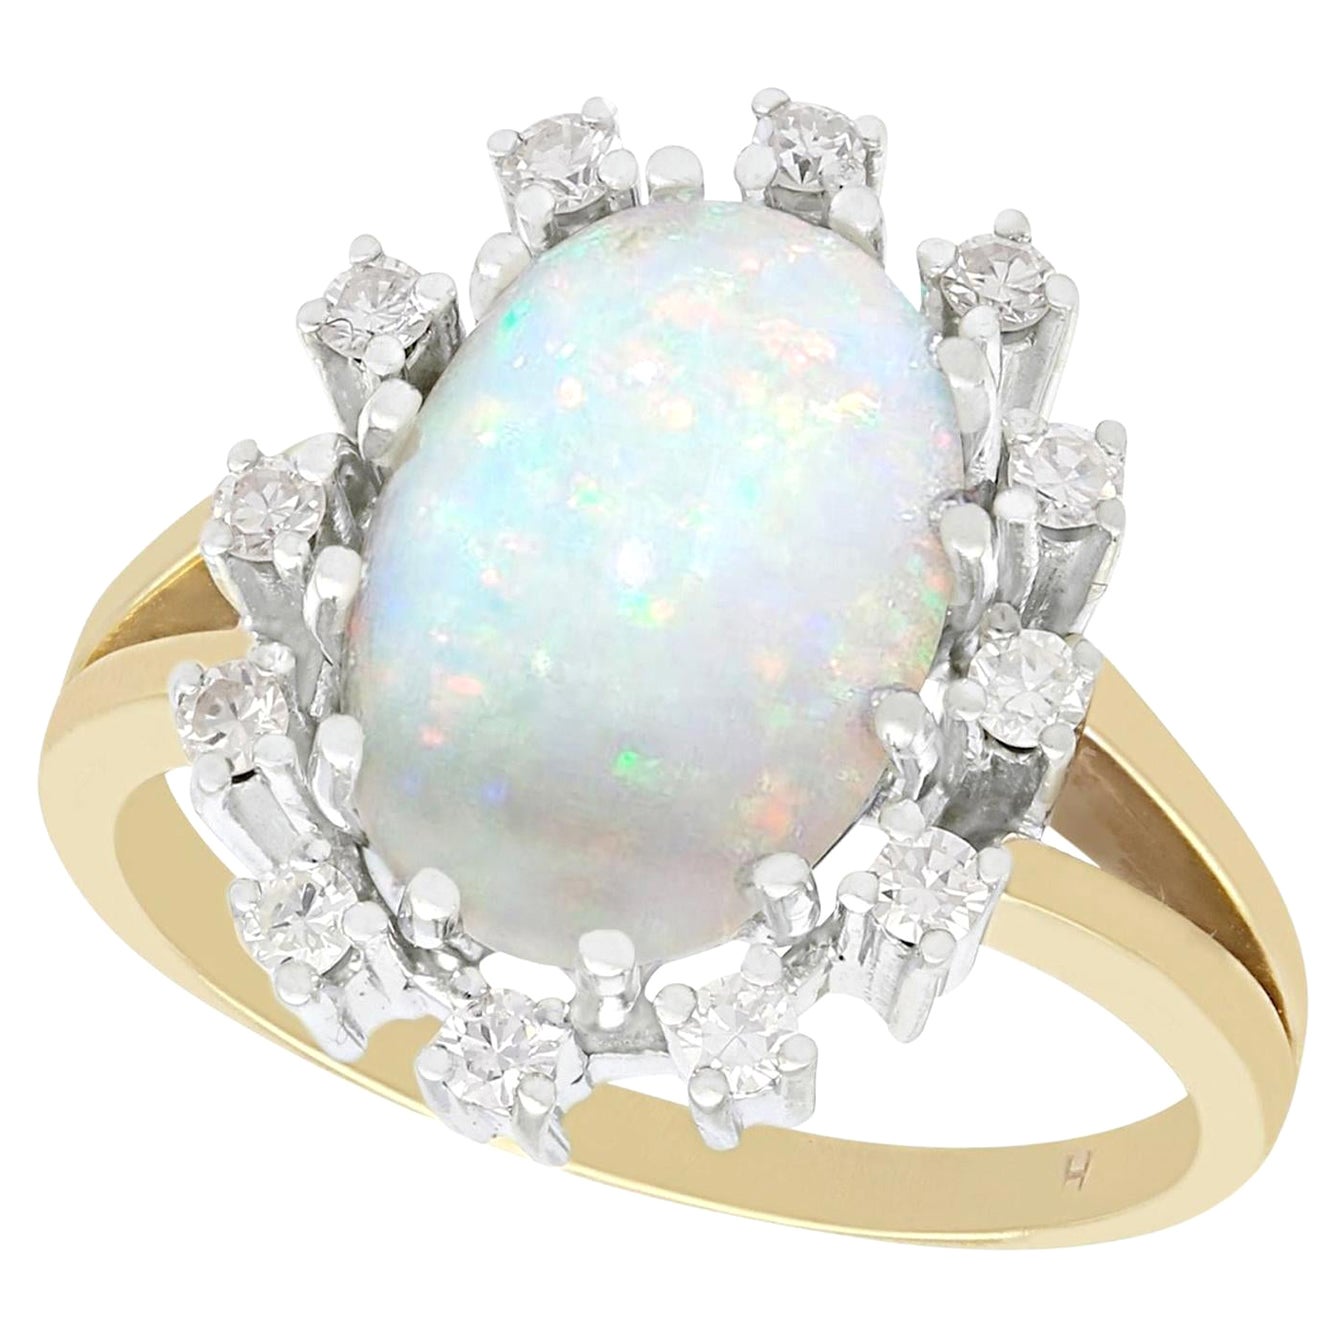 1960s 3.01 Carat Cabochon Cut Opal and Diamond Yellow Gold Cocktail Ring For Sale